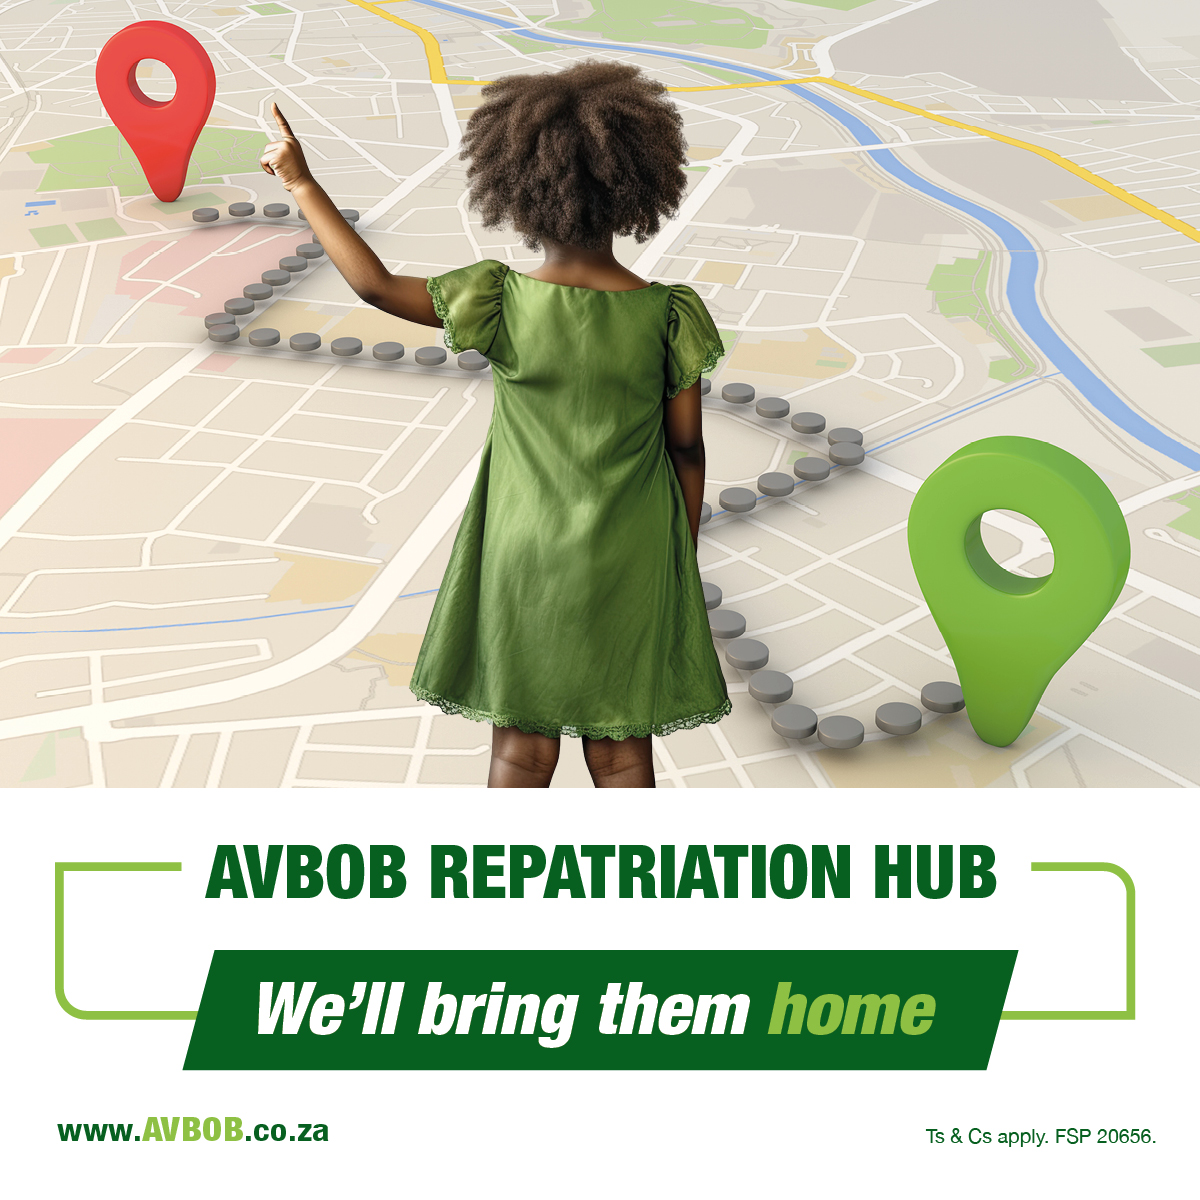 Whether you’re an AVBOB policyholder or not, we’ll bring your loved ones home. Contact the AVBOB Repatriation Hub on repathub@funeral.avbob.co.za or click here to request a quote: bit.ly/RepatHub Ts & Cs apply. FSP 20656. #AVBOBFunerals #FuneralService #Repatriation